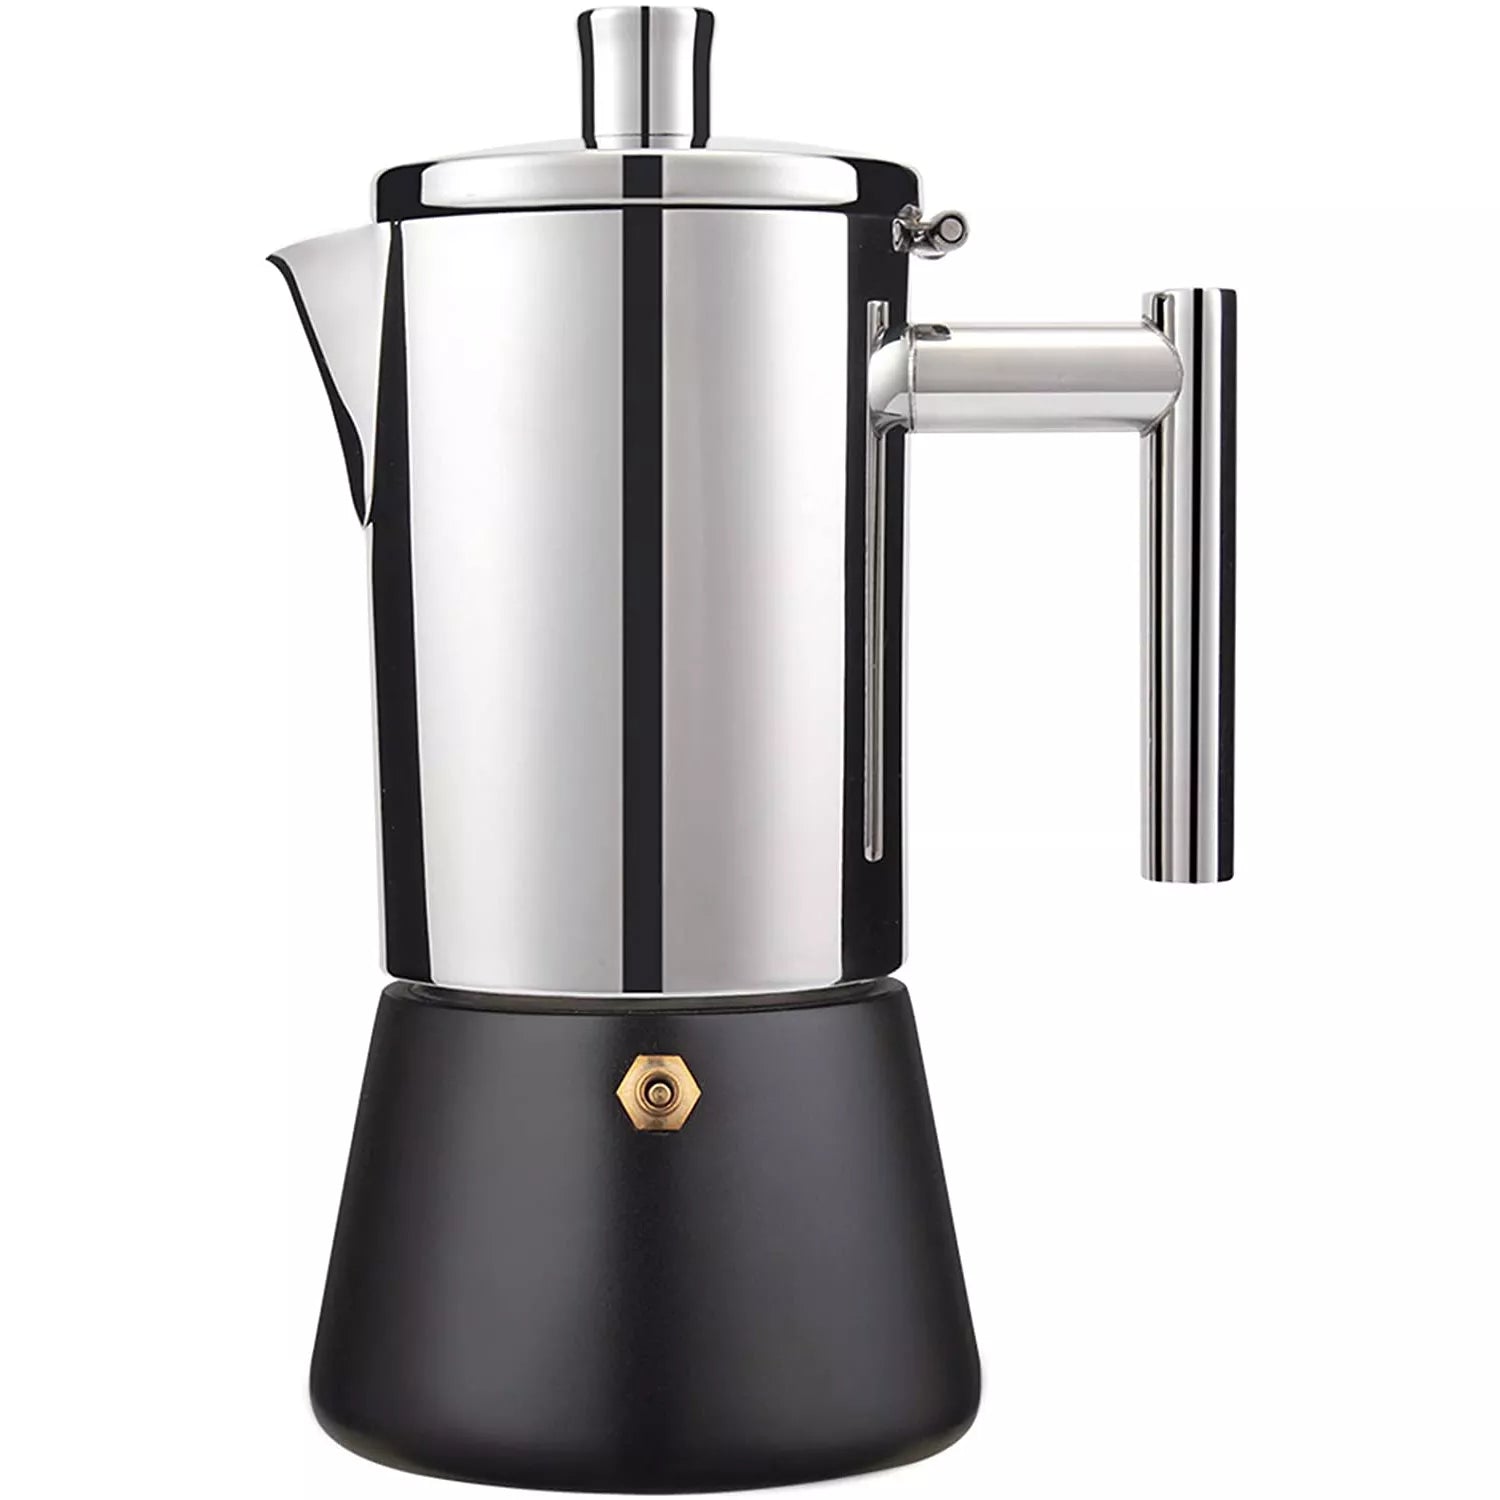 Stainless Steel Stovetop Espresso Maker, Moka Pot, Cuban Coffee Maker,Italian Espresso Maker for Induction Gas or Electric Stove